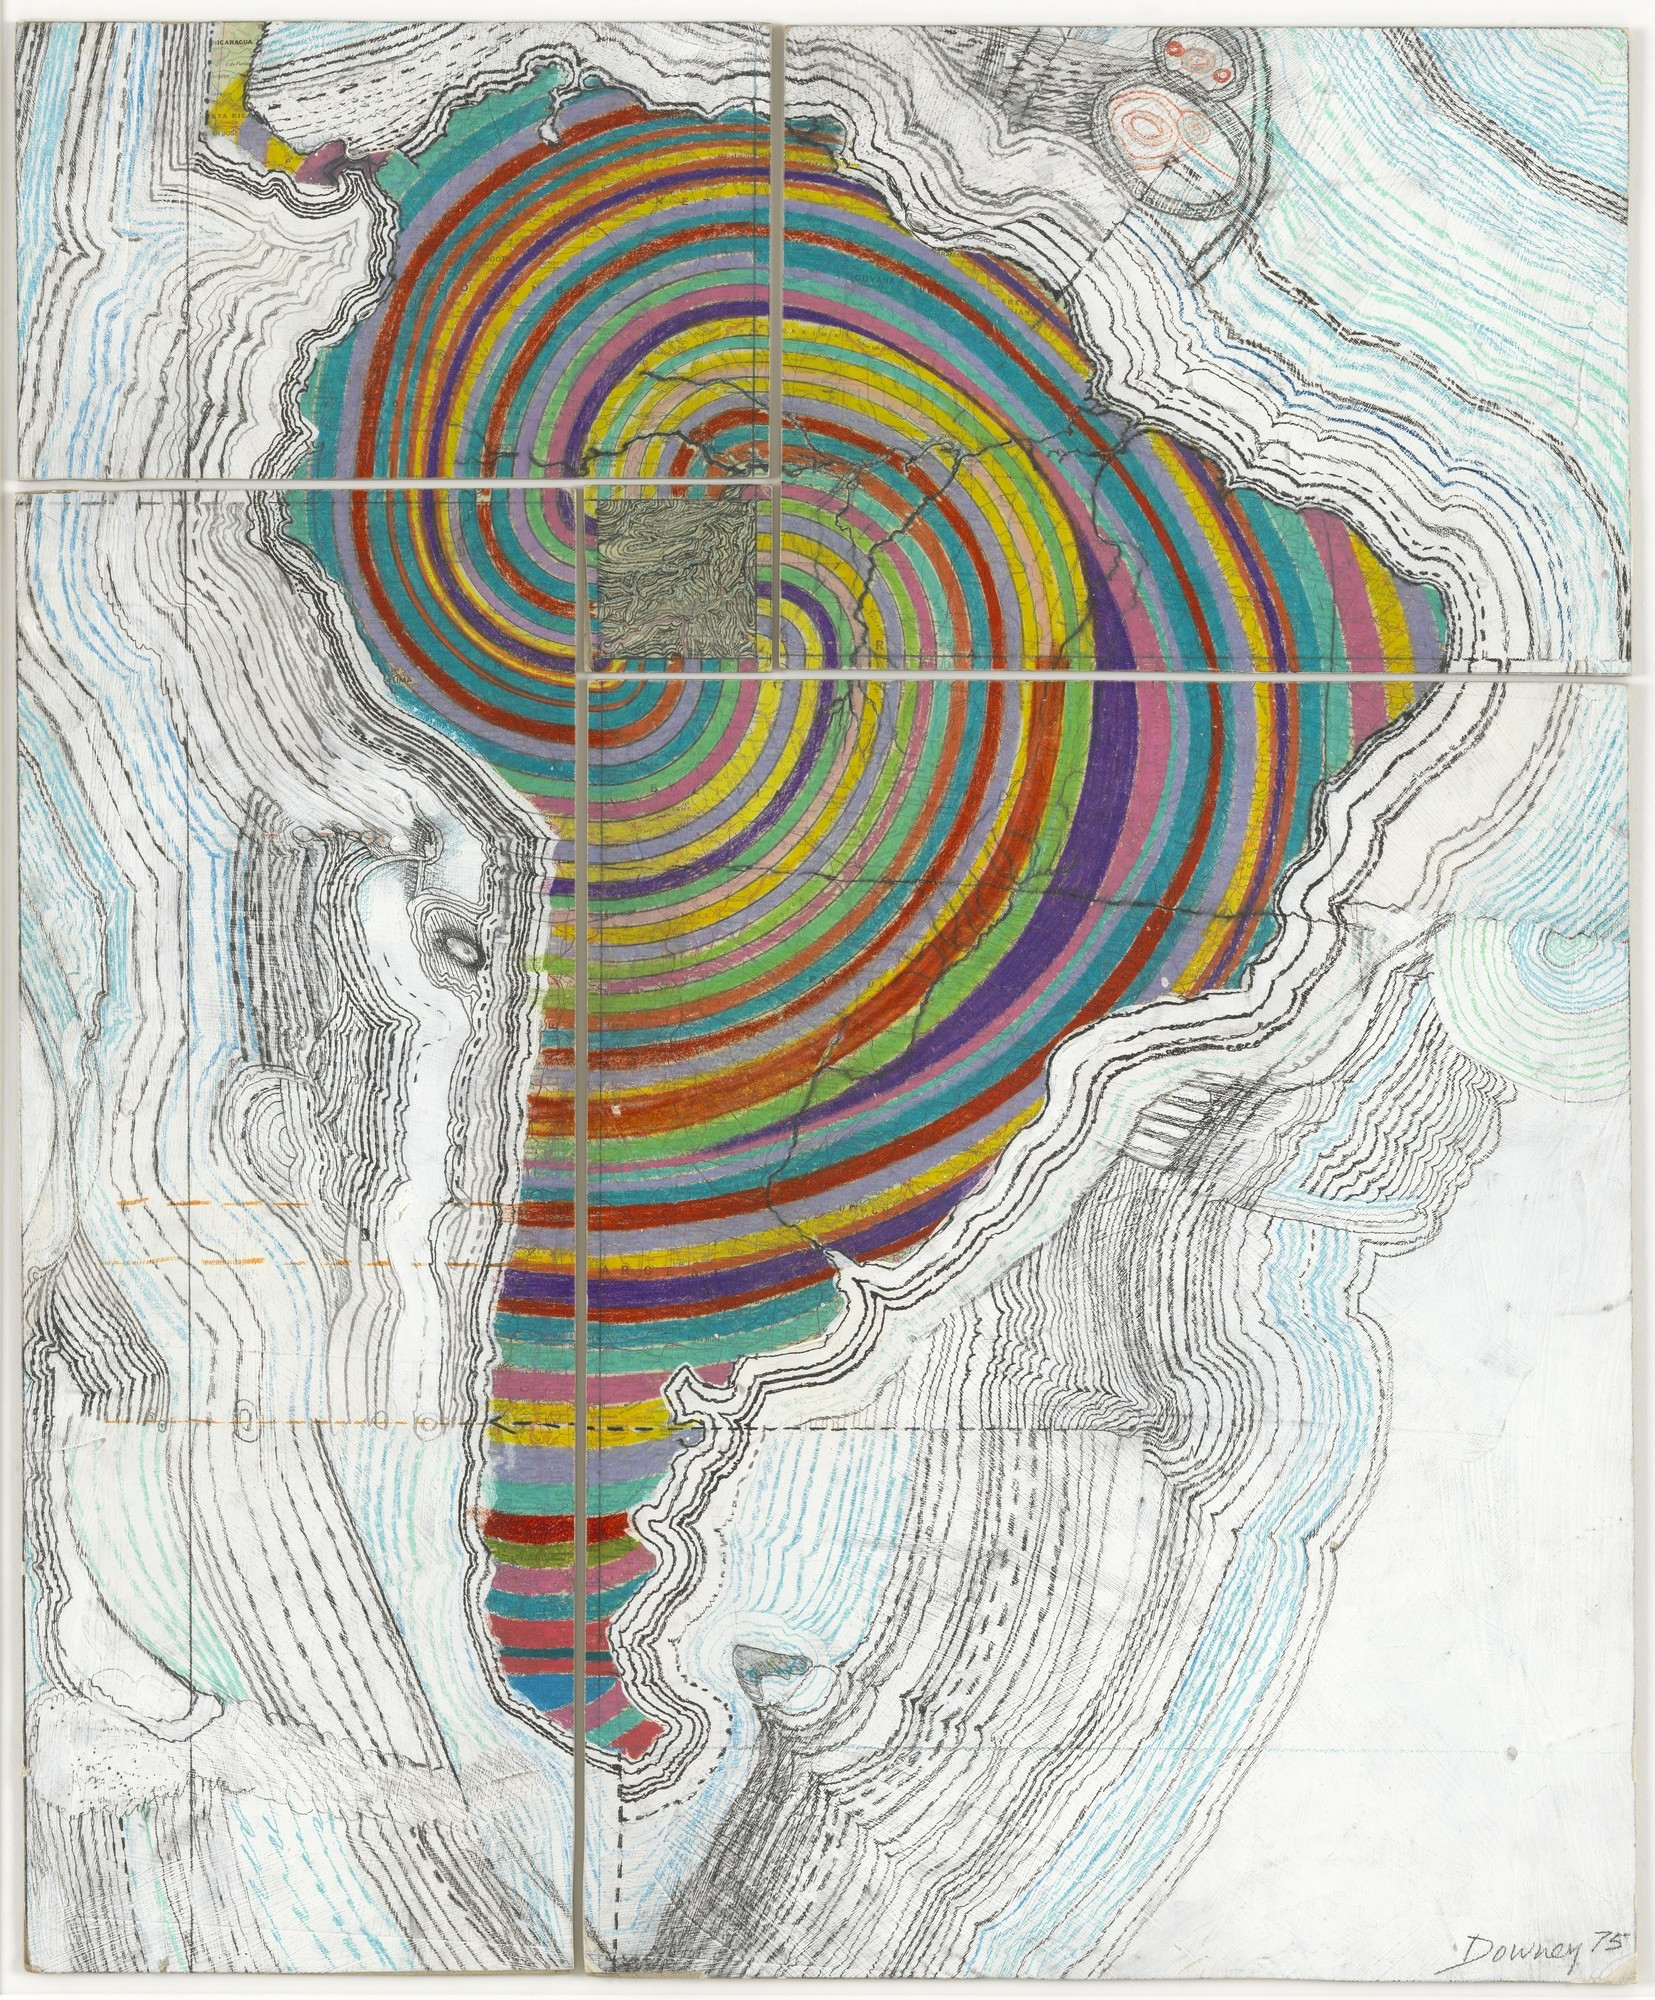 Juan Downey. Map of America. 1975. Colored pencil, pencil, and acrylic on map on board. 34 1/8 × 20 1/4” (86.7 × 51.4 cm). Purchased with funds provided by the Latin American and Caribbean Fund and Donald B. Marron. Photo: Jonathan Muzikar